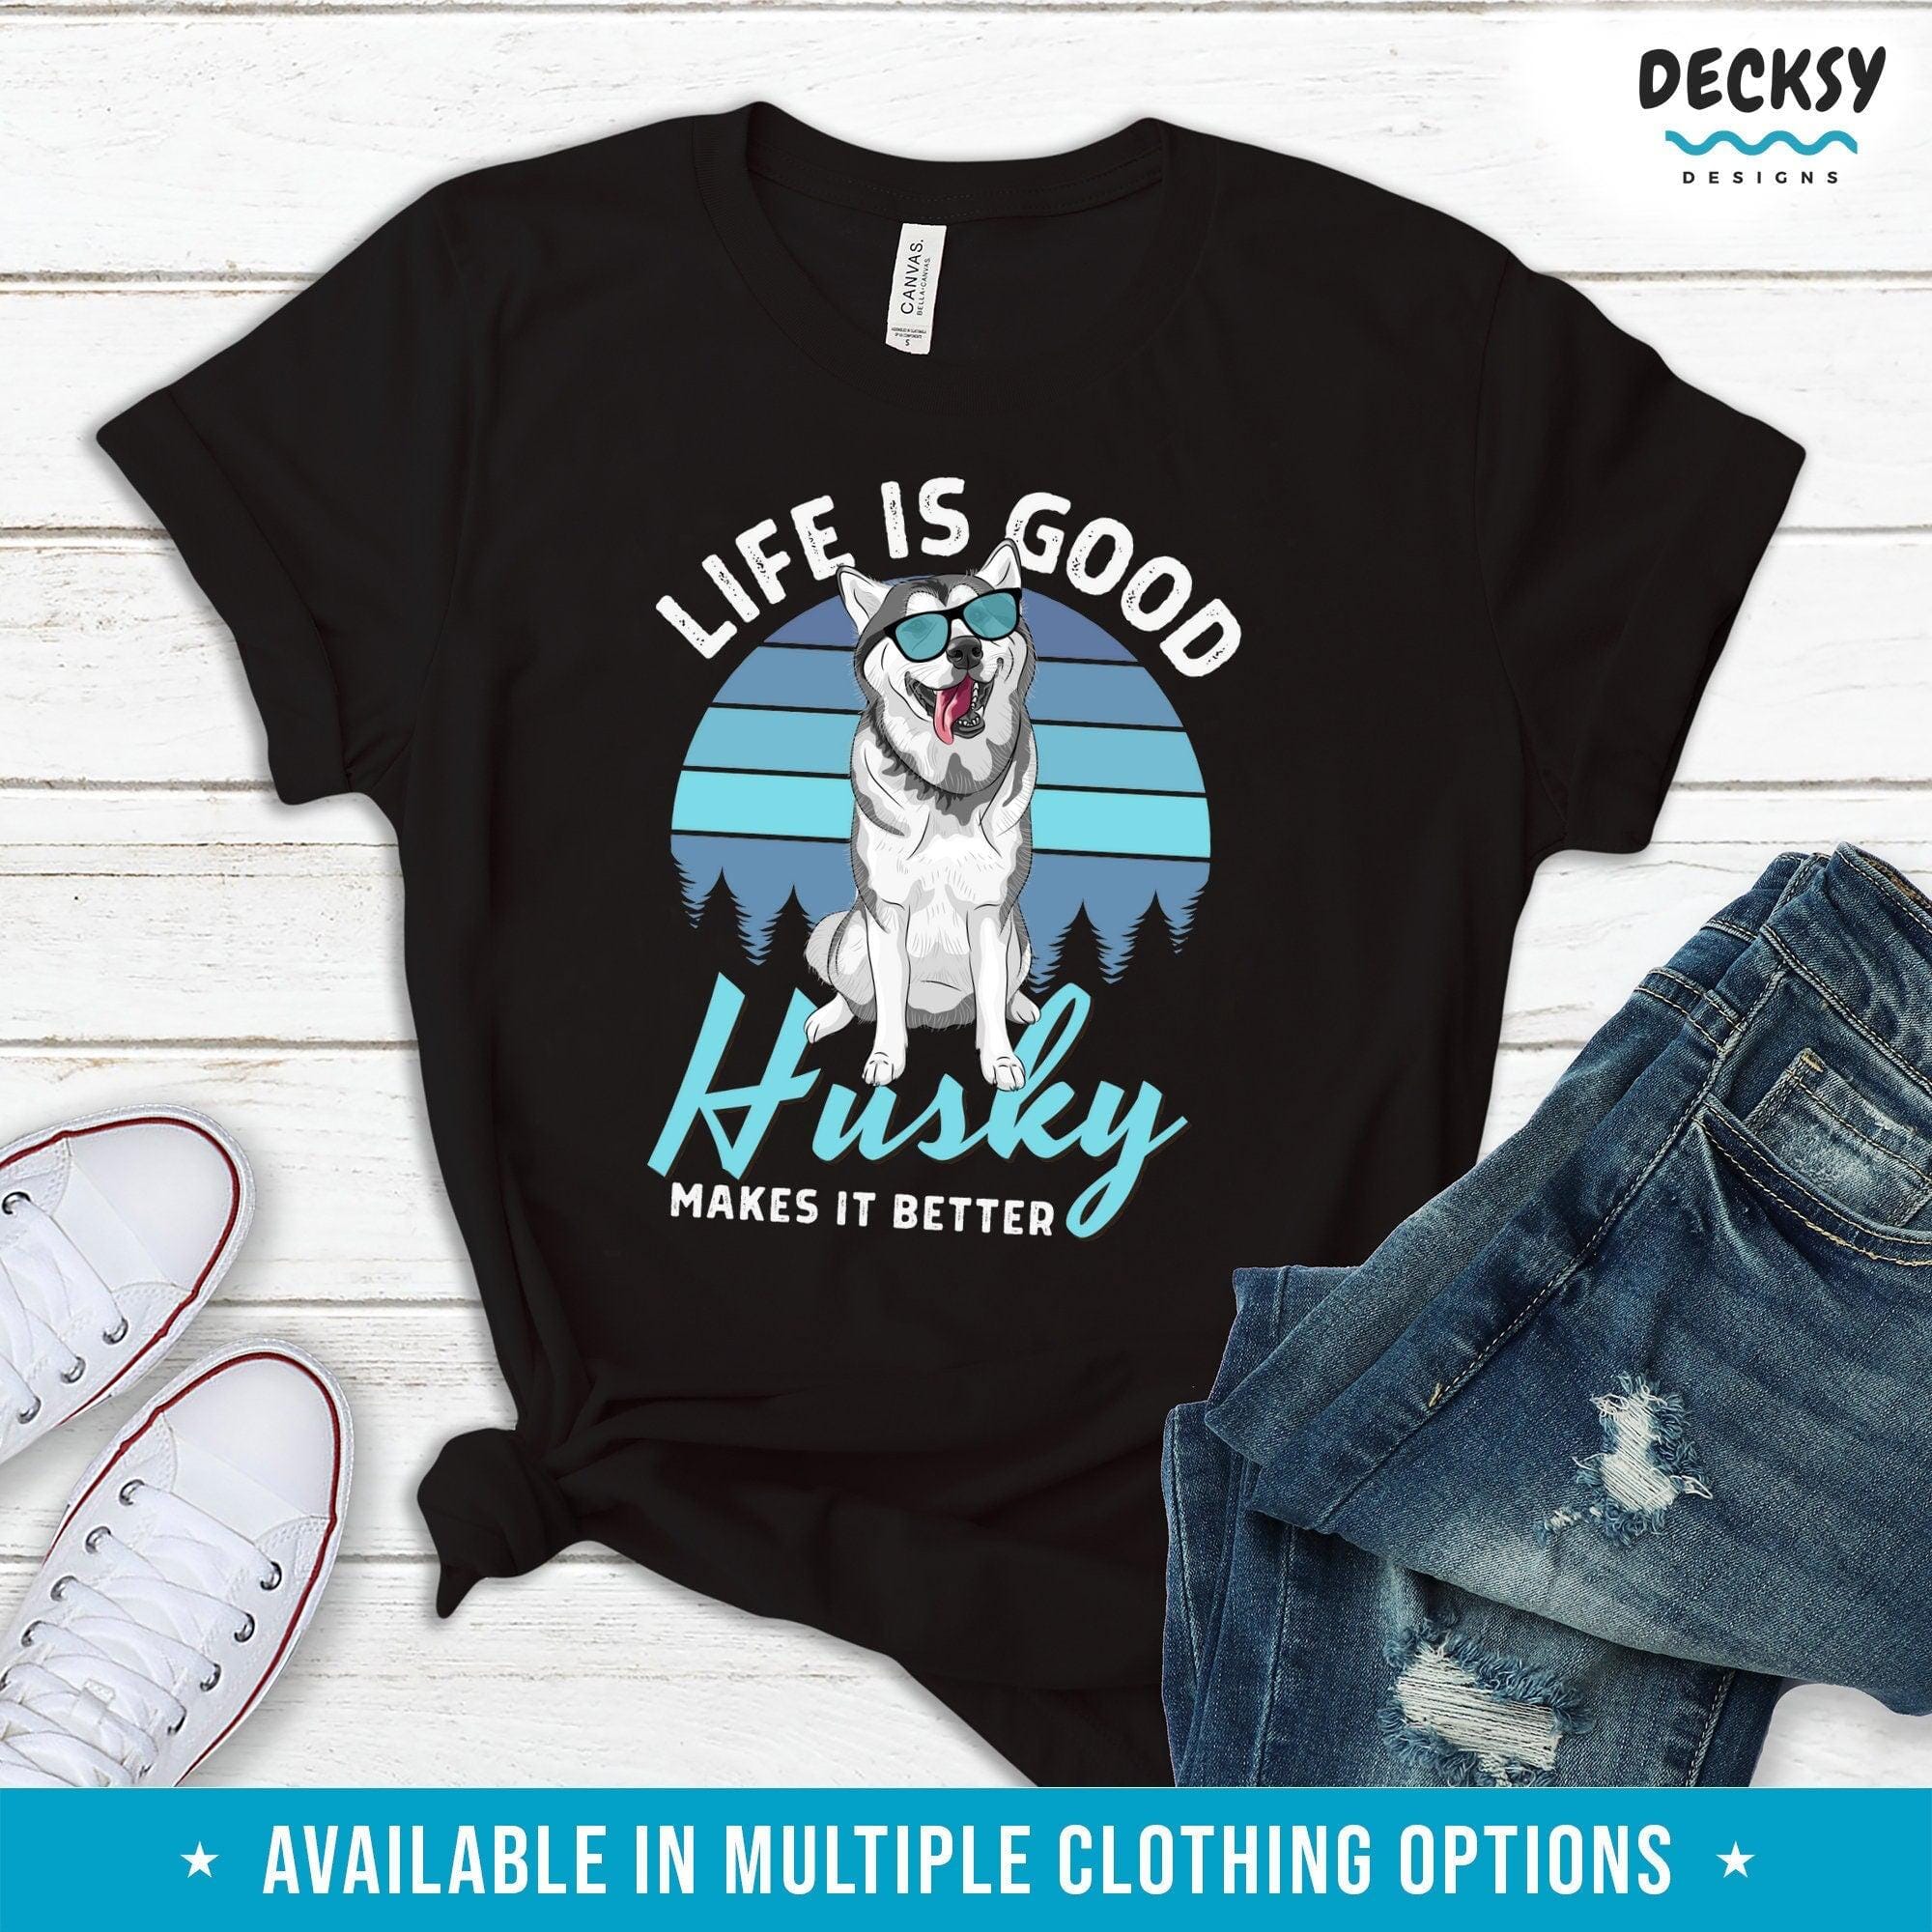 Husky Lover T-shirt, Dog Lover Gift-Clothing:Gender-Neutral Adult Clothing:Tops & Tees:T-shirts:Graphic Tees-DecksyDesigns